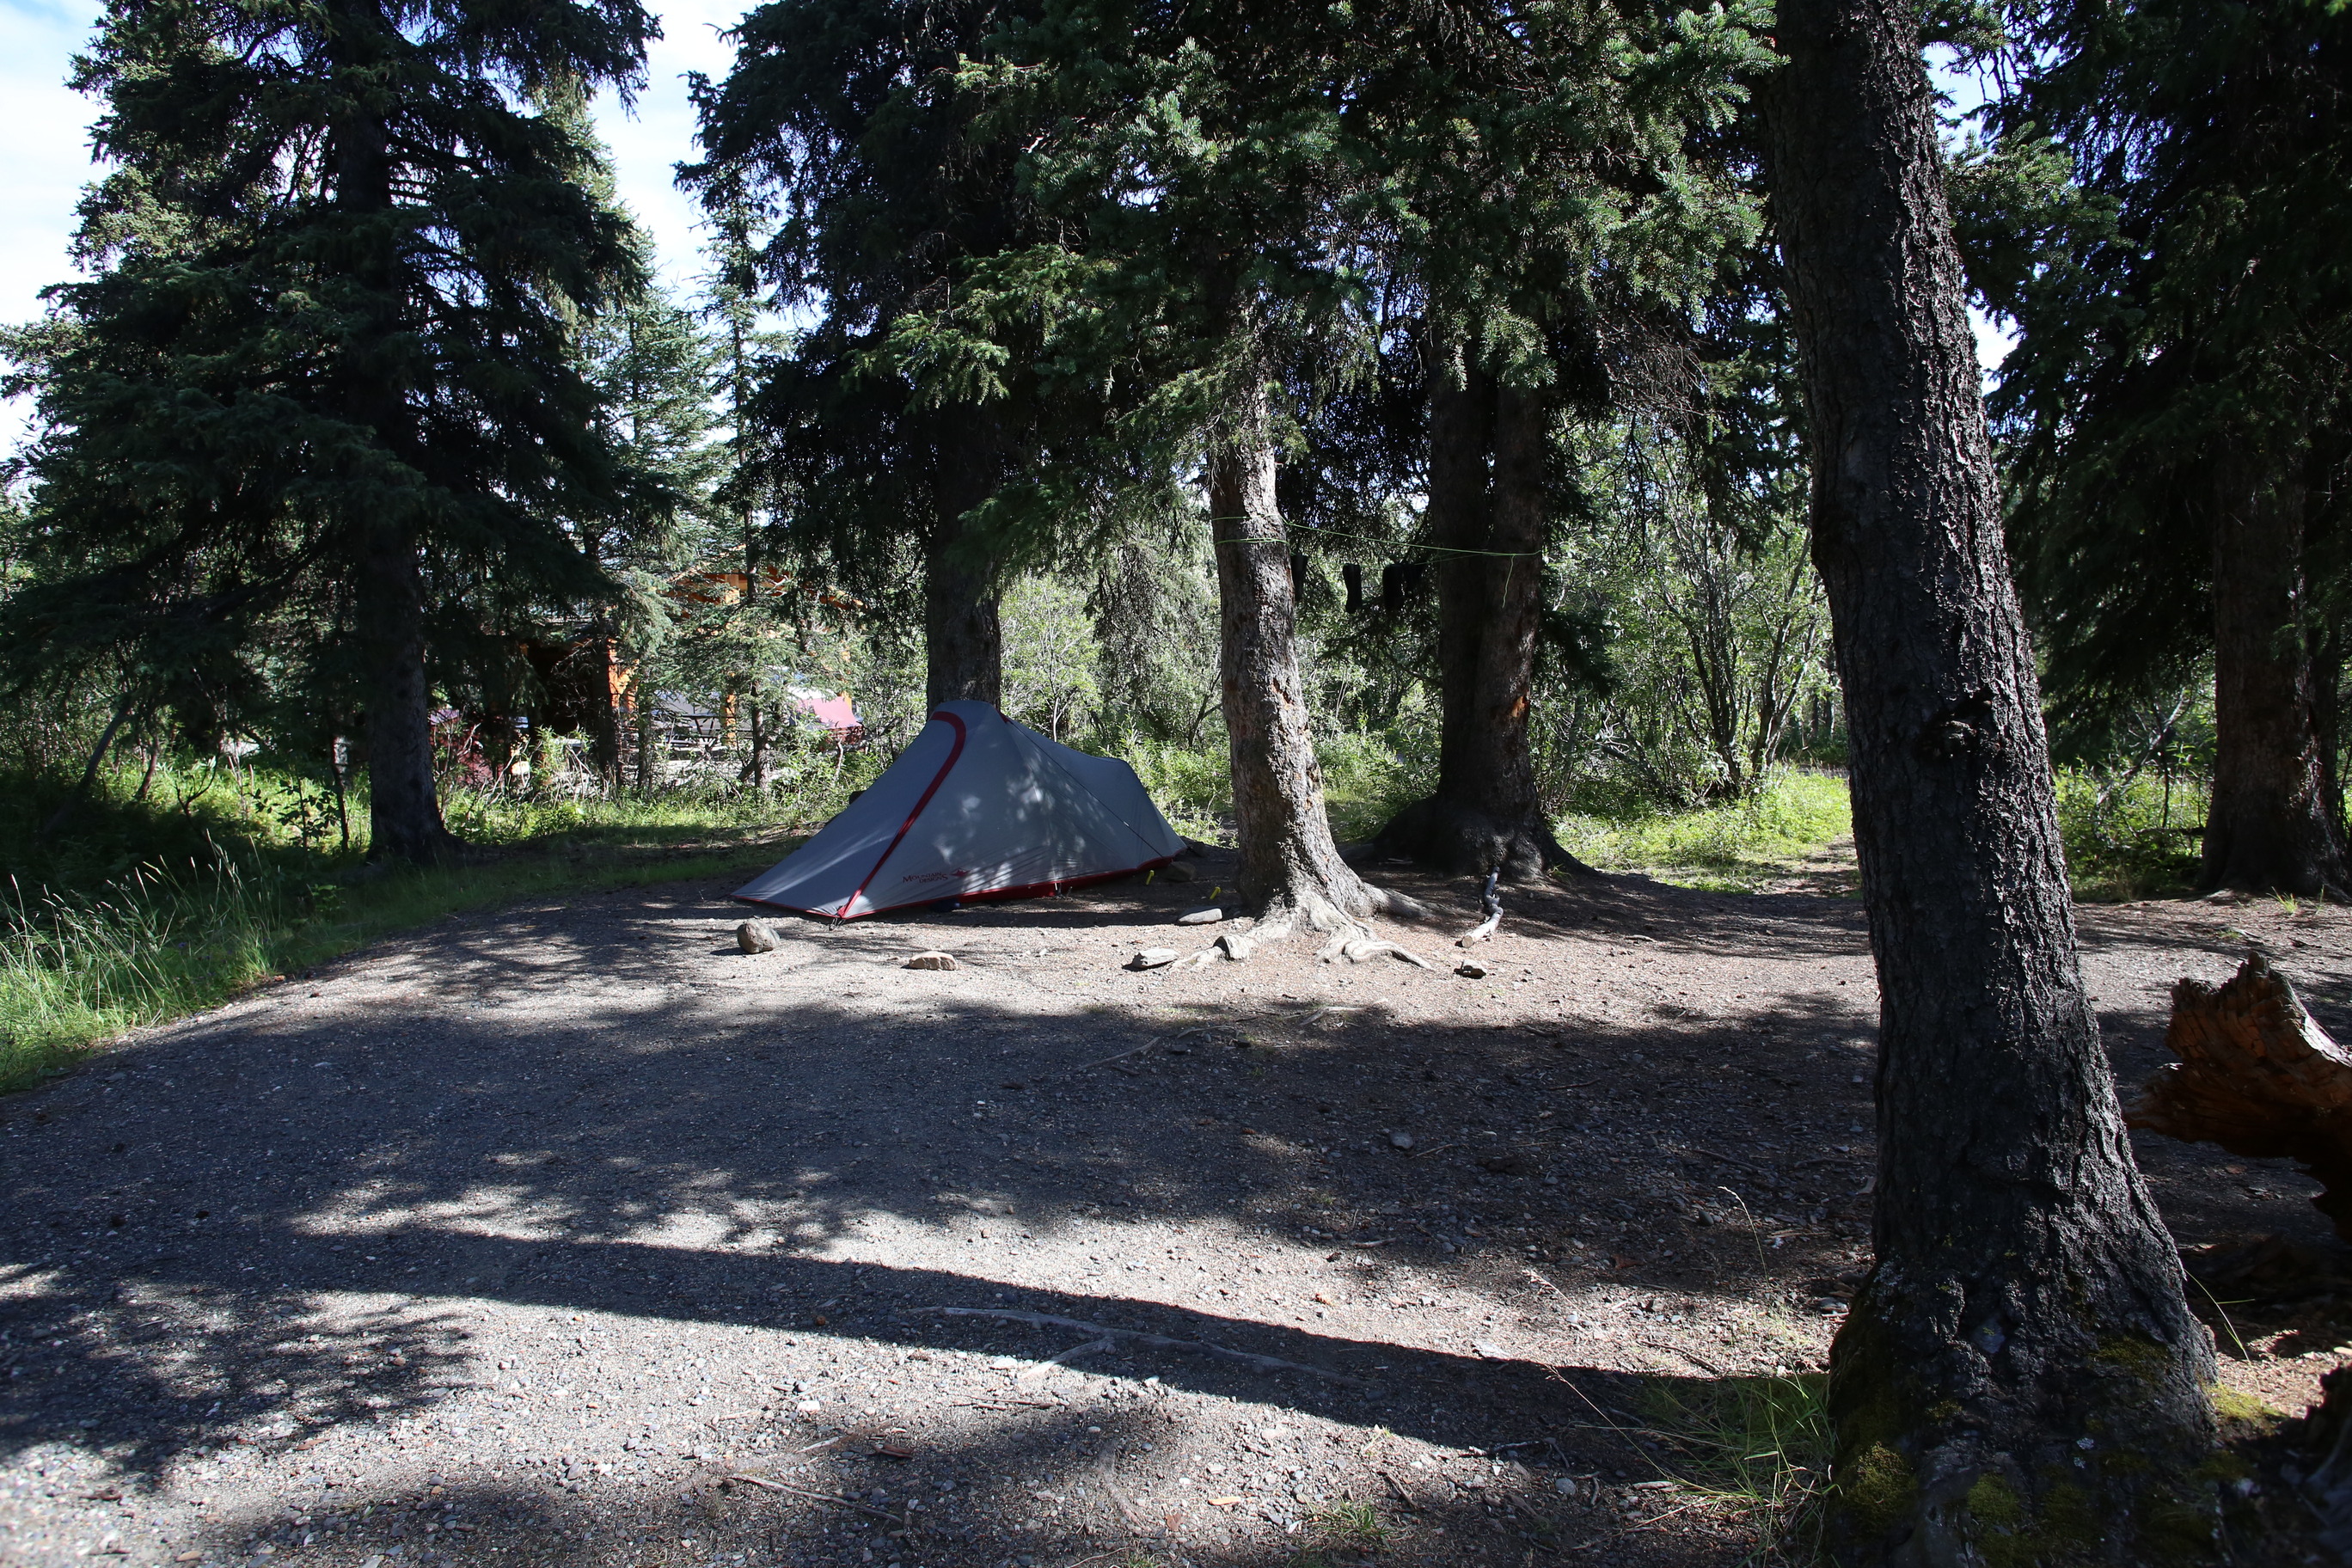 large spruce trees around a tent